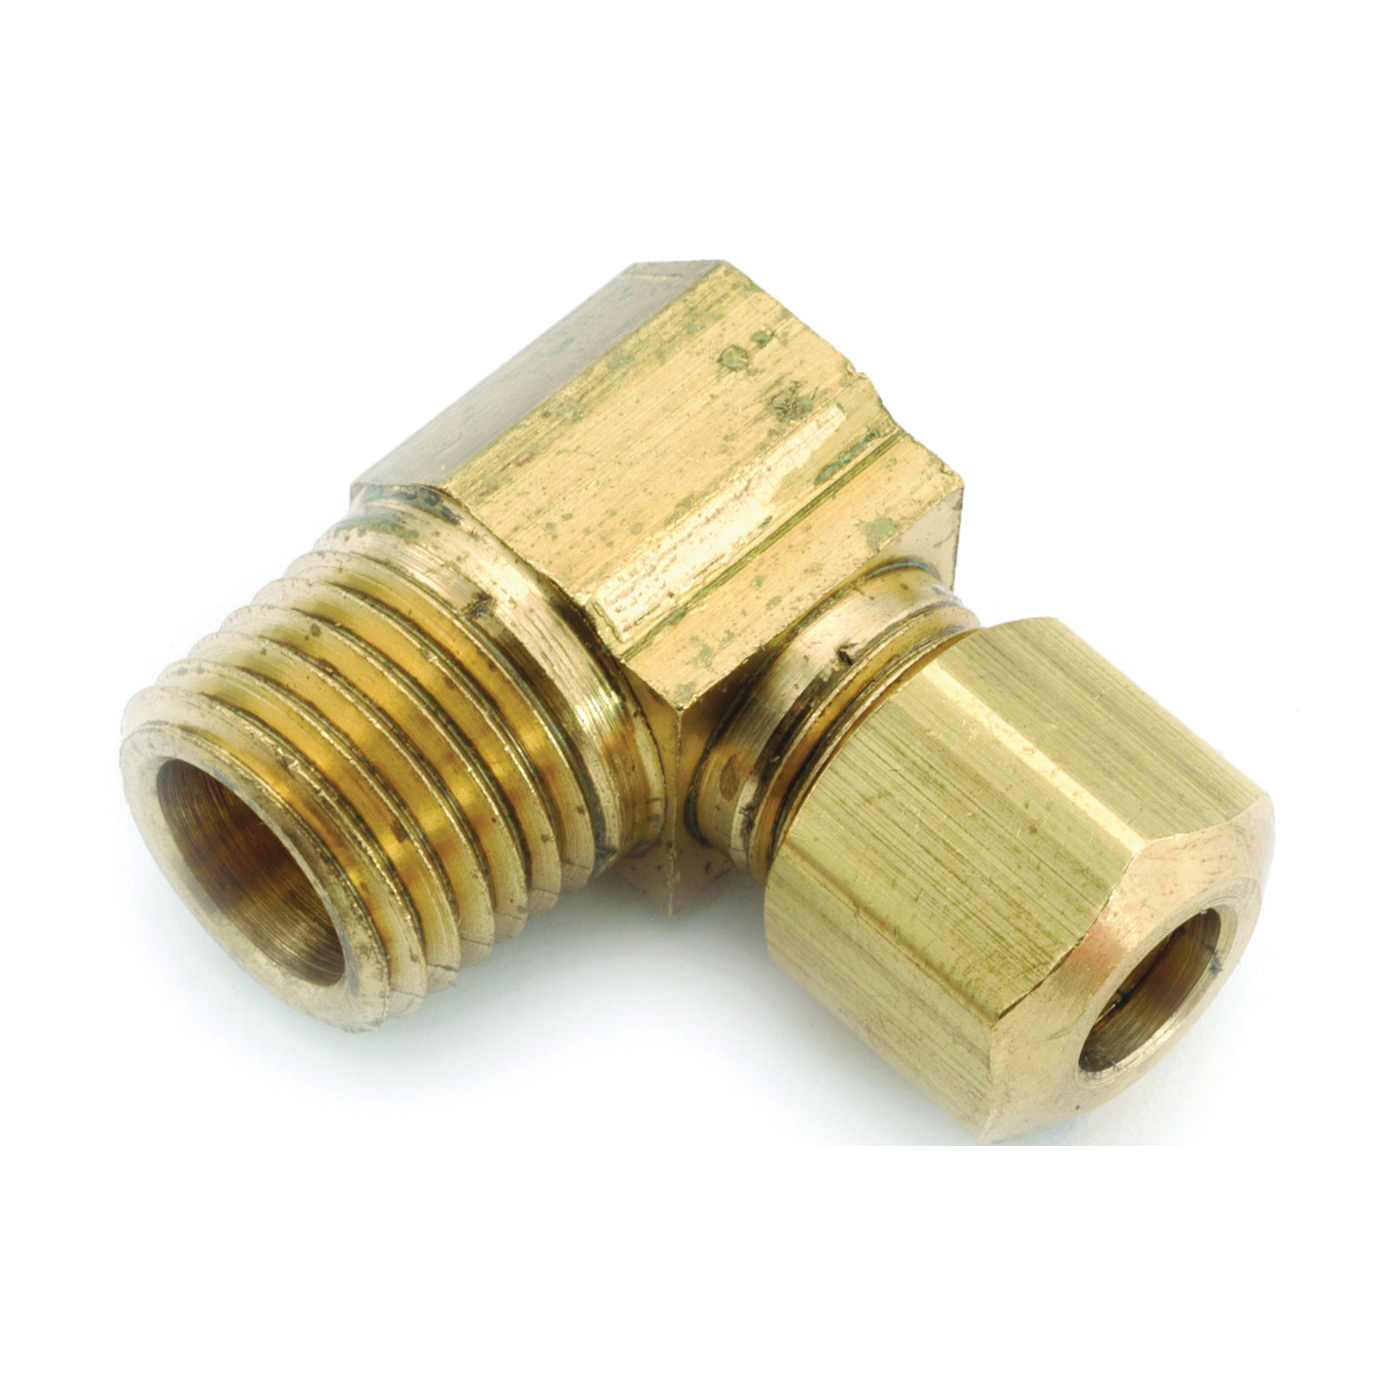 Anderson Metals 750069-0808 Tube Elbow, 1/2 in, 90 deg Angle, Brass, 200 psi Pressure - 1